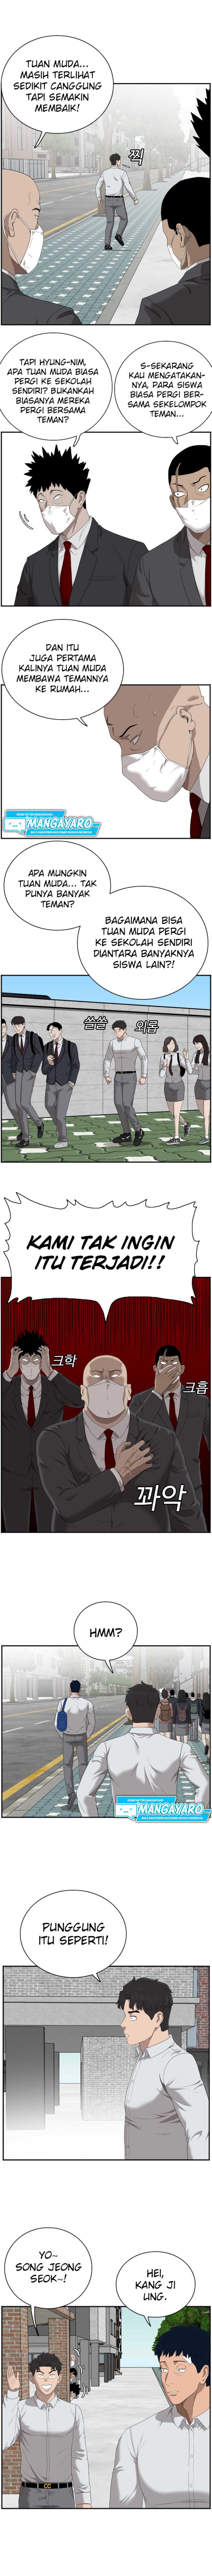 A Bad Person Chapter 43